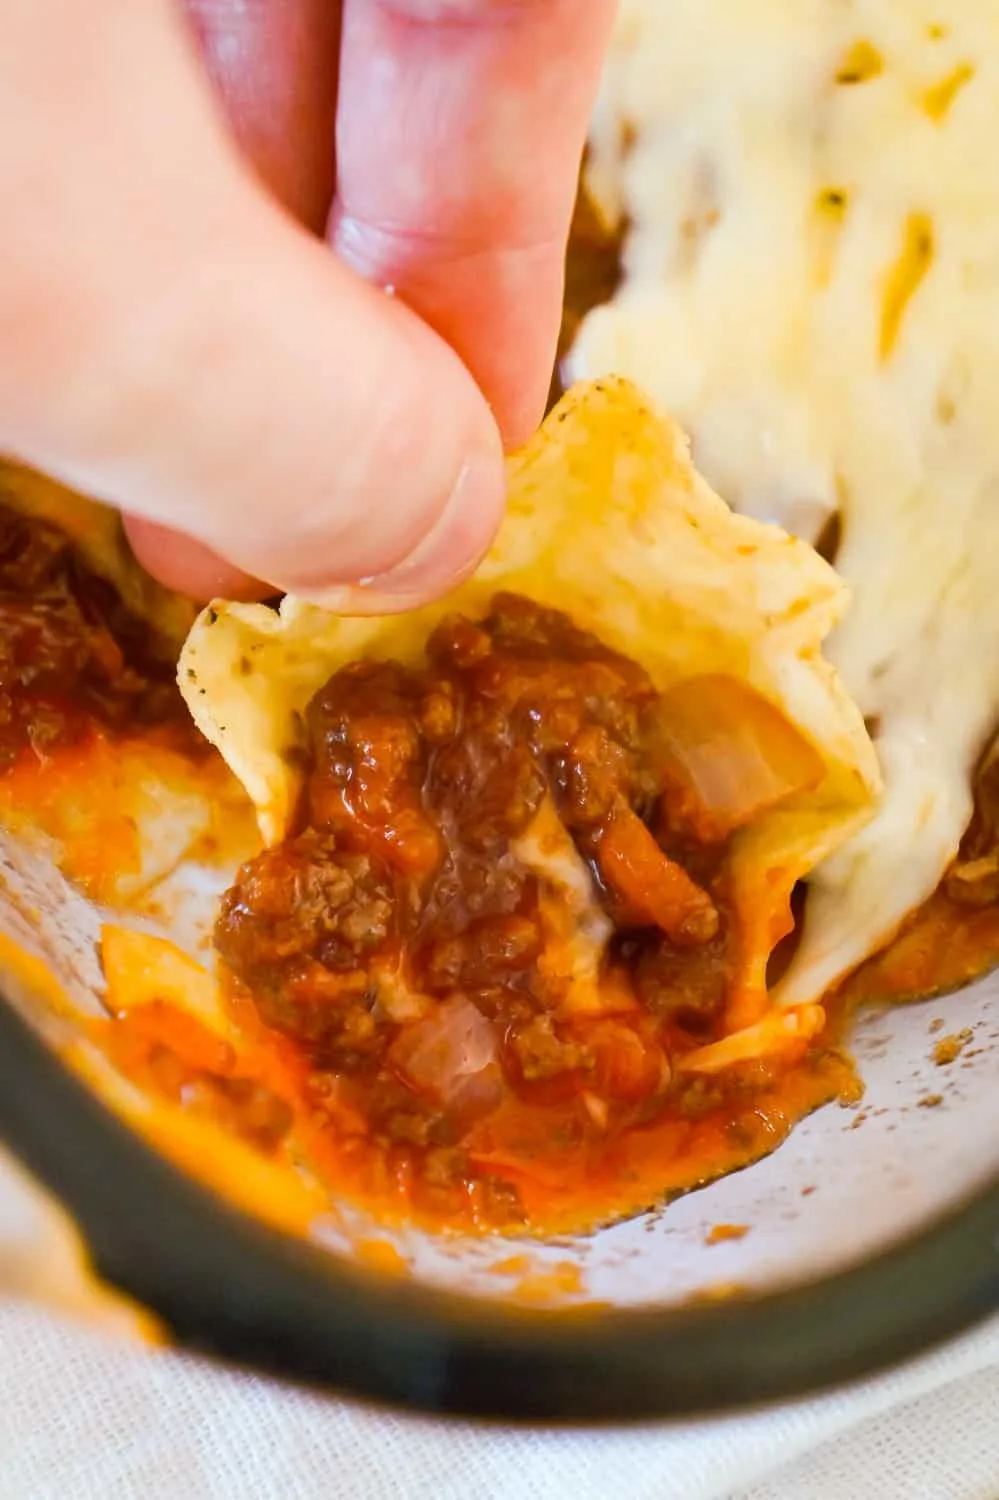 Sloppy Joe Dip is a delicious party dip recipe loaded with ground beef and dripping with melted cheese. This dip, with all the flavours of the classic sloppy joe, is perfect for dipping chips and crackers.